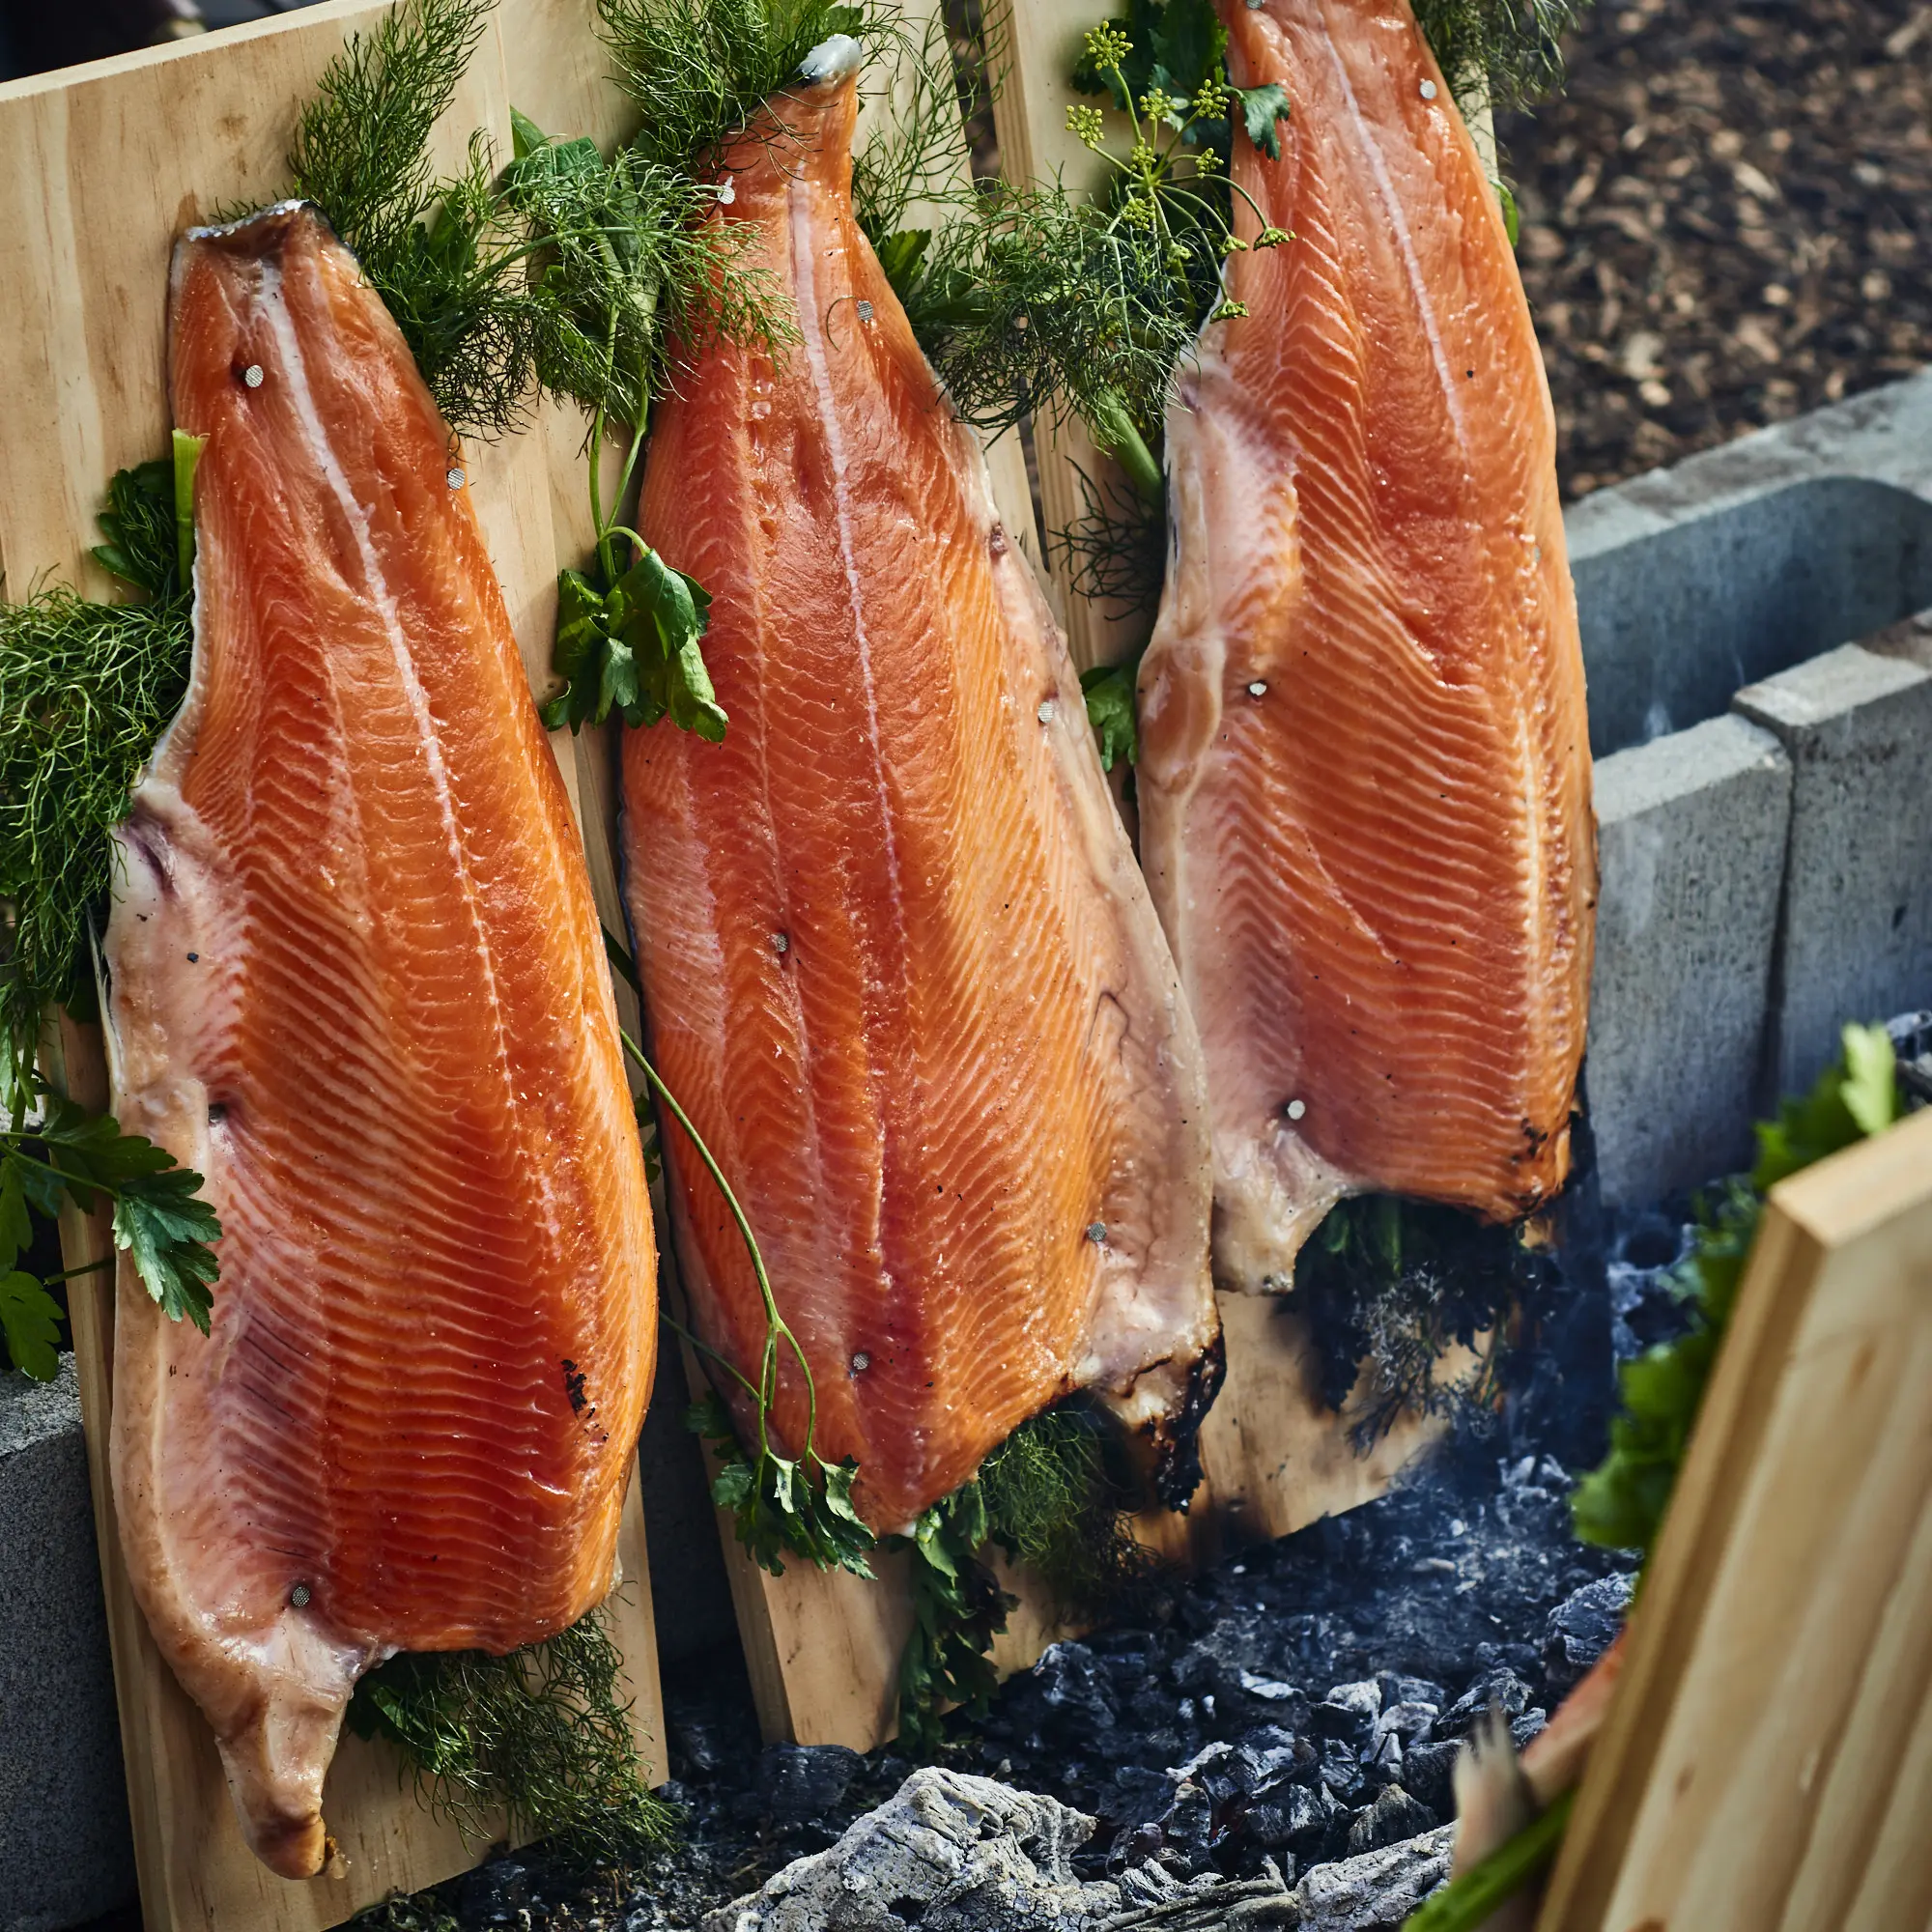 Whole sides of salmon cooked over open fire